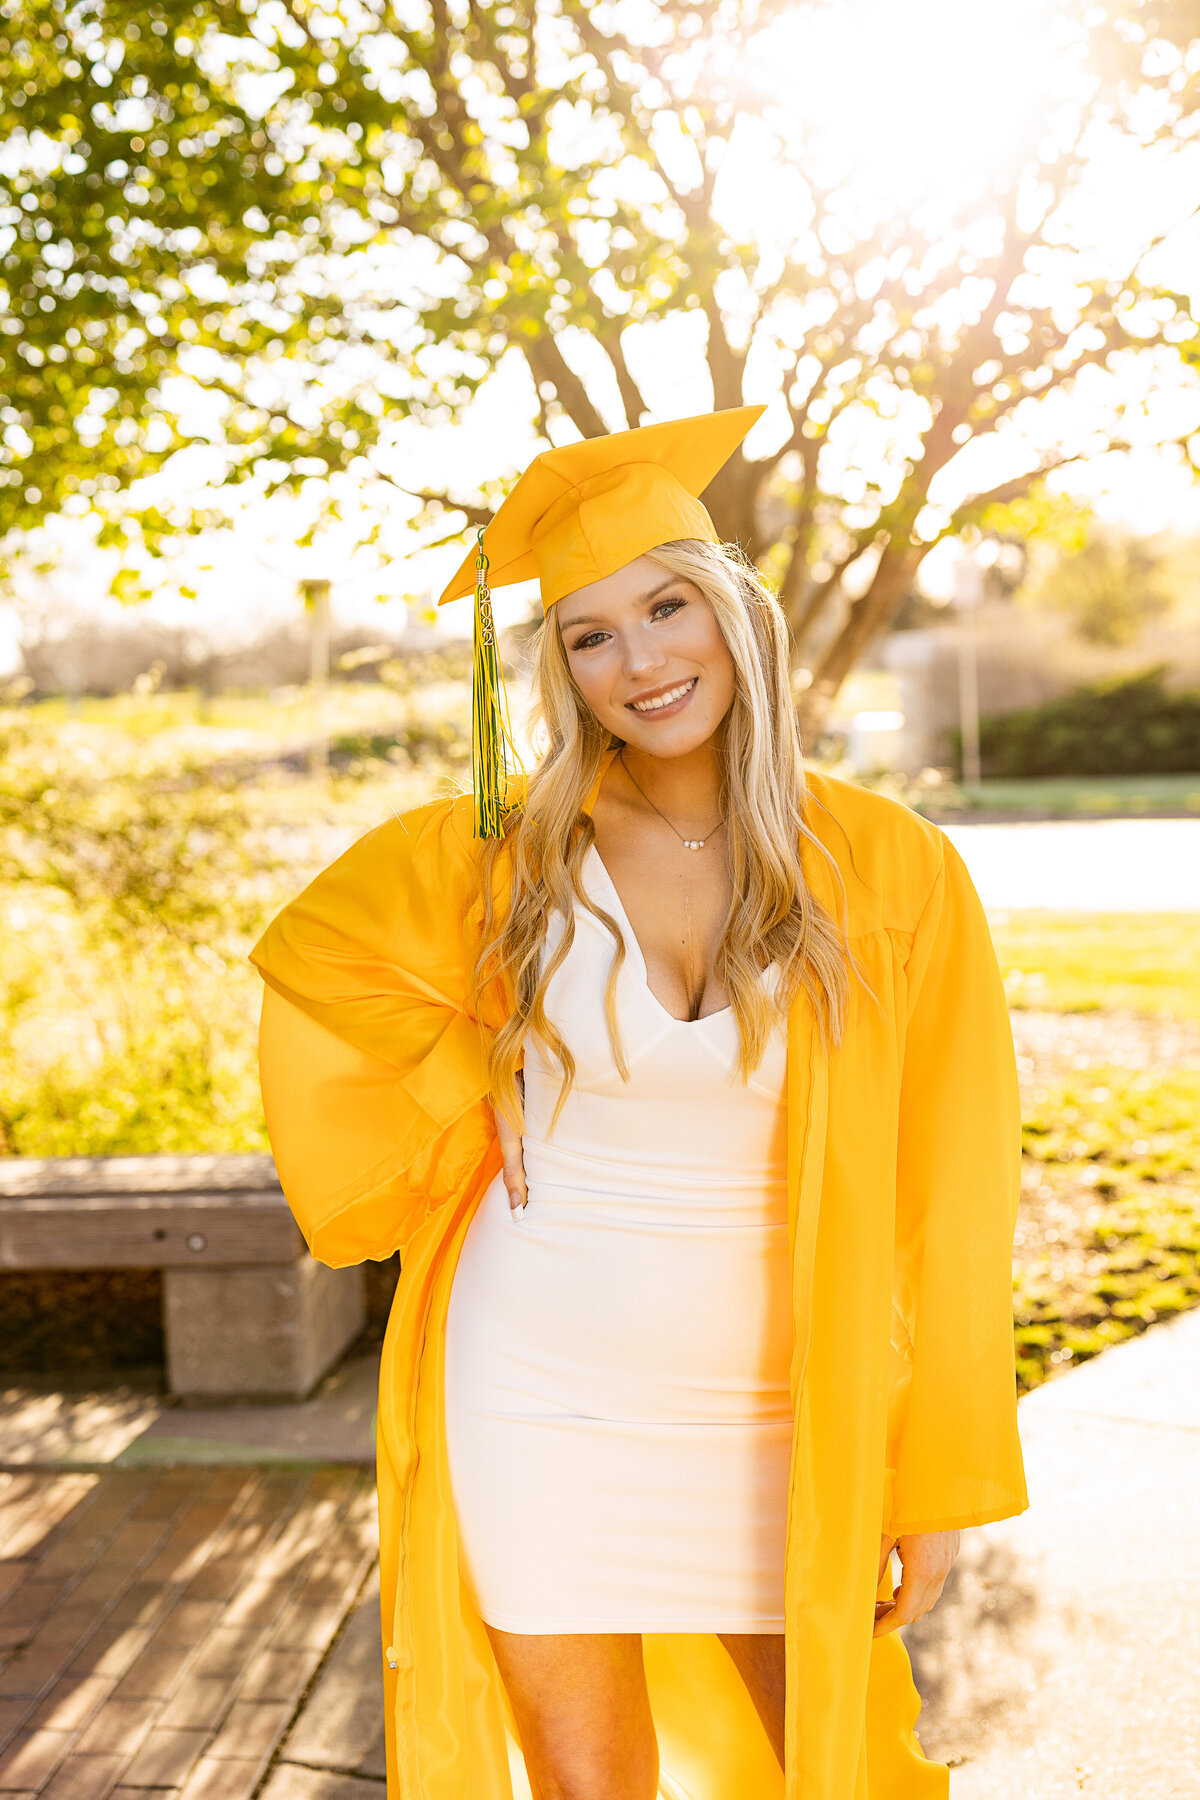 Cap and Gown 112